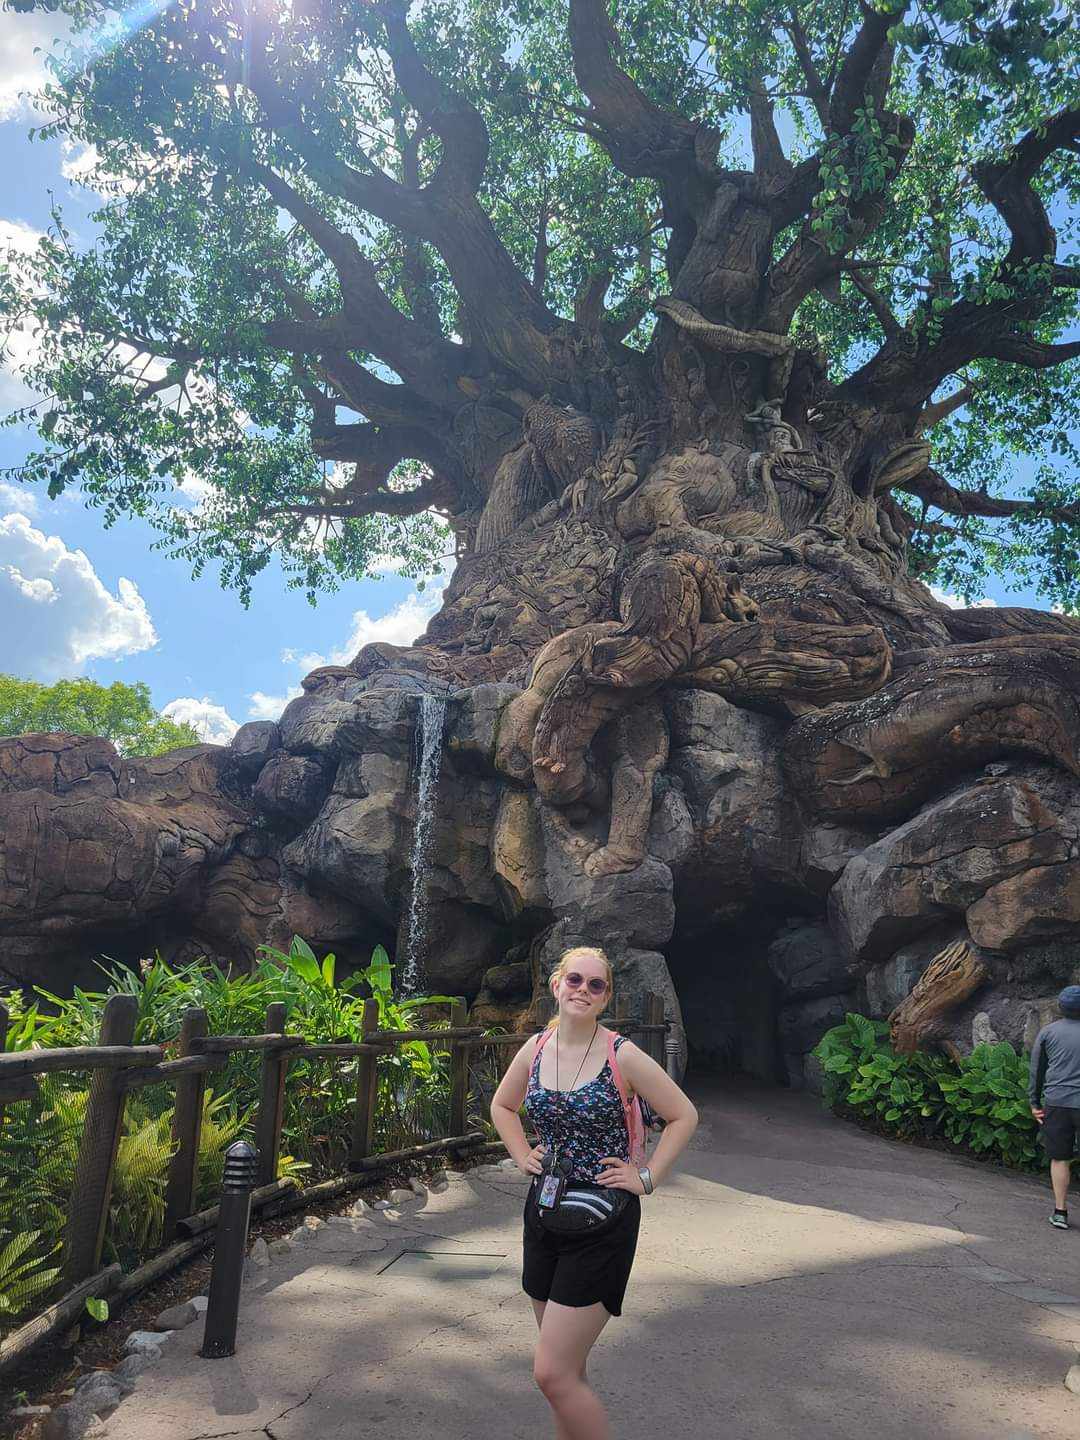 The Tree of Life in Animal Kingdom